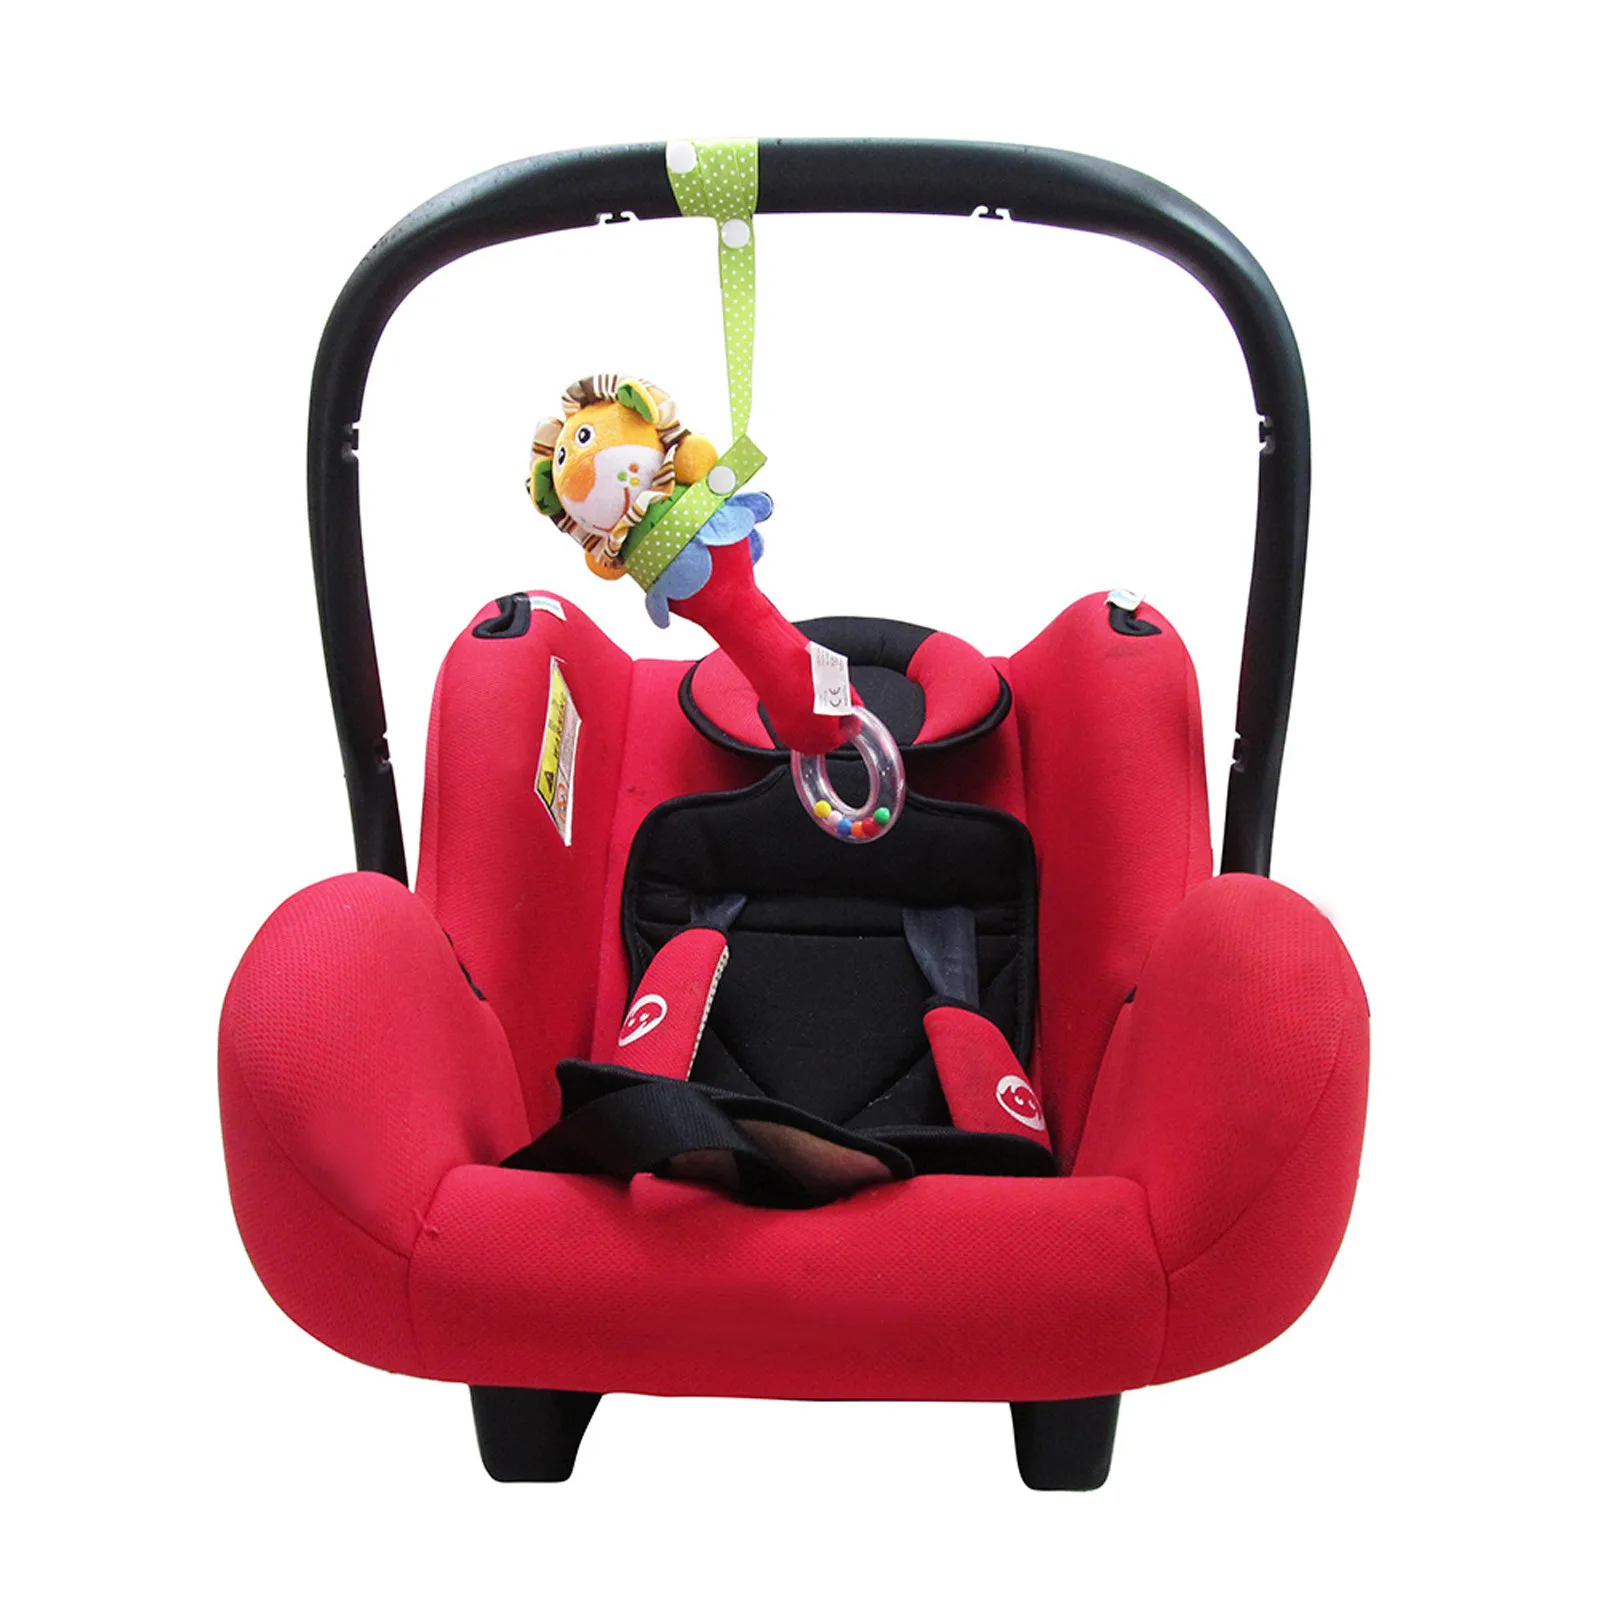 used baby strollers near me Baby Anti-Drop Hanger Belt Holder Toys Stroller Strap Fixed Car Pacifier Chain baby stroller accessories bassinet